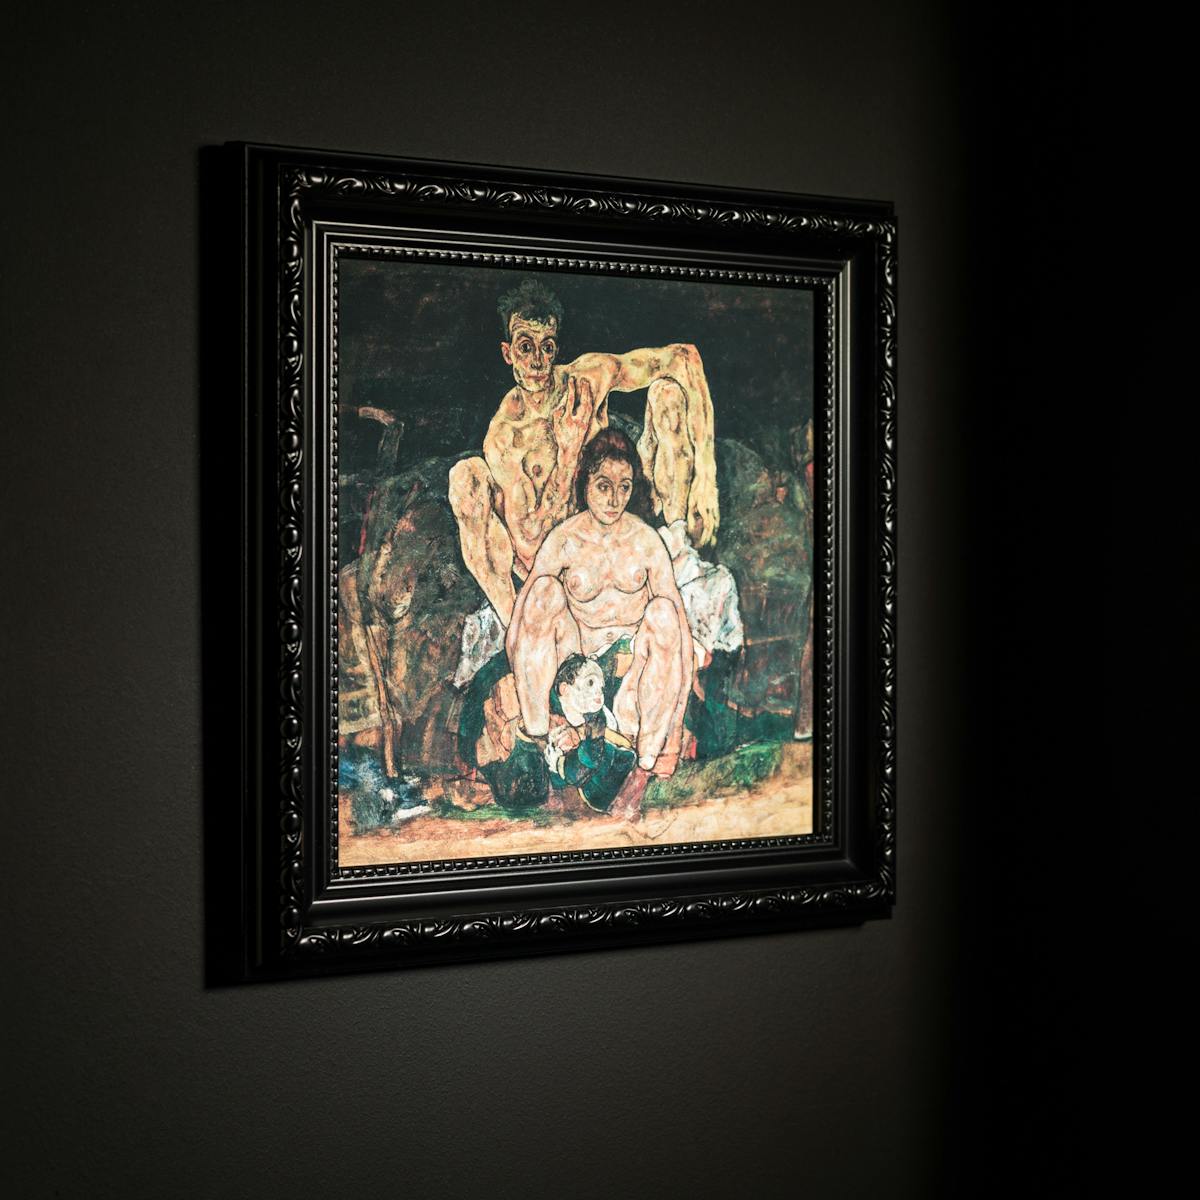 Photograph black ornate picture frame hung on a black wall. Inside the frame is a print of an oil painting by Egon Schiele titled, 'The Family'. It depicts  Schiele himself at the far back, his sinewy nude body hunched behind his wife, Edith, who looks off to the side, while a child is curled between her feet.